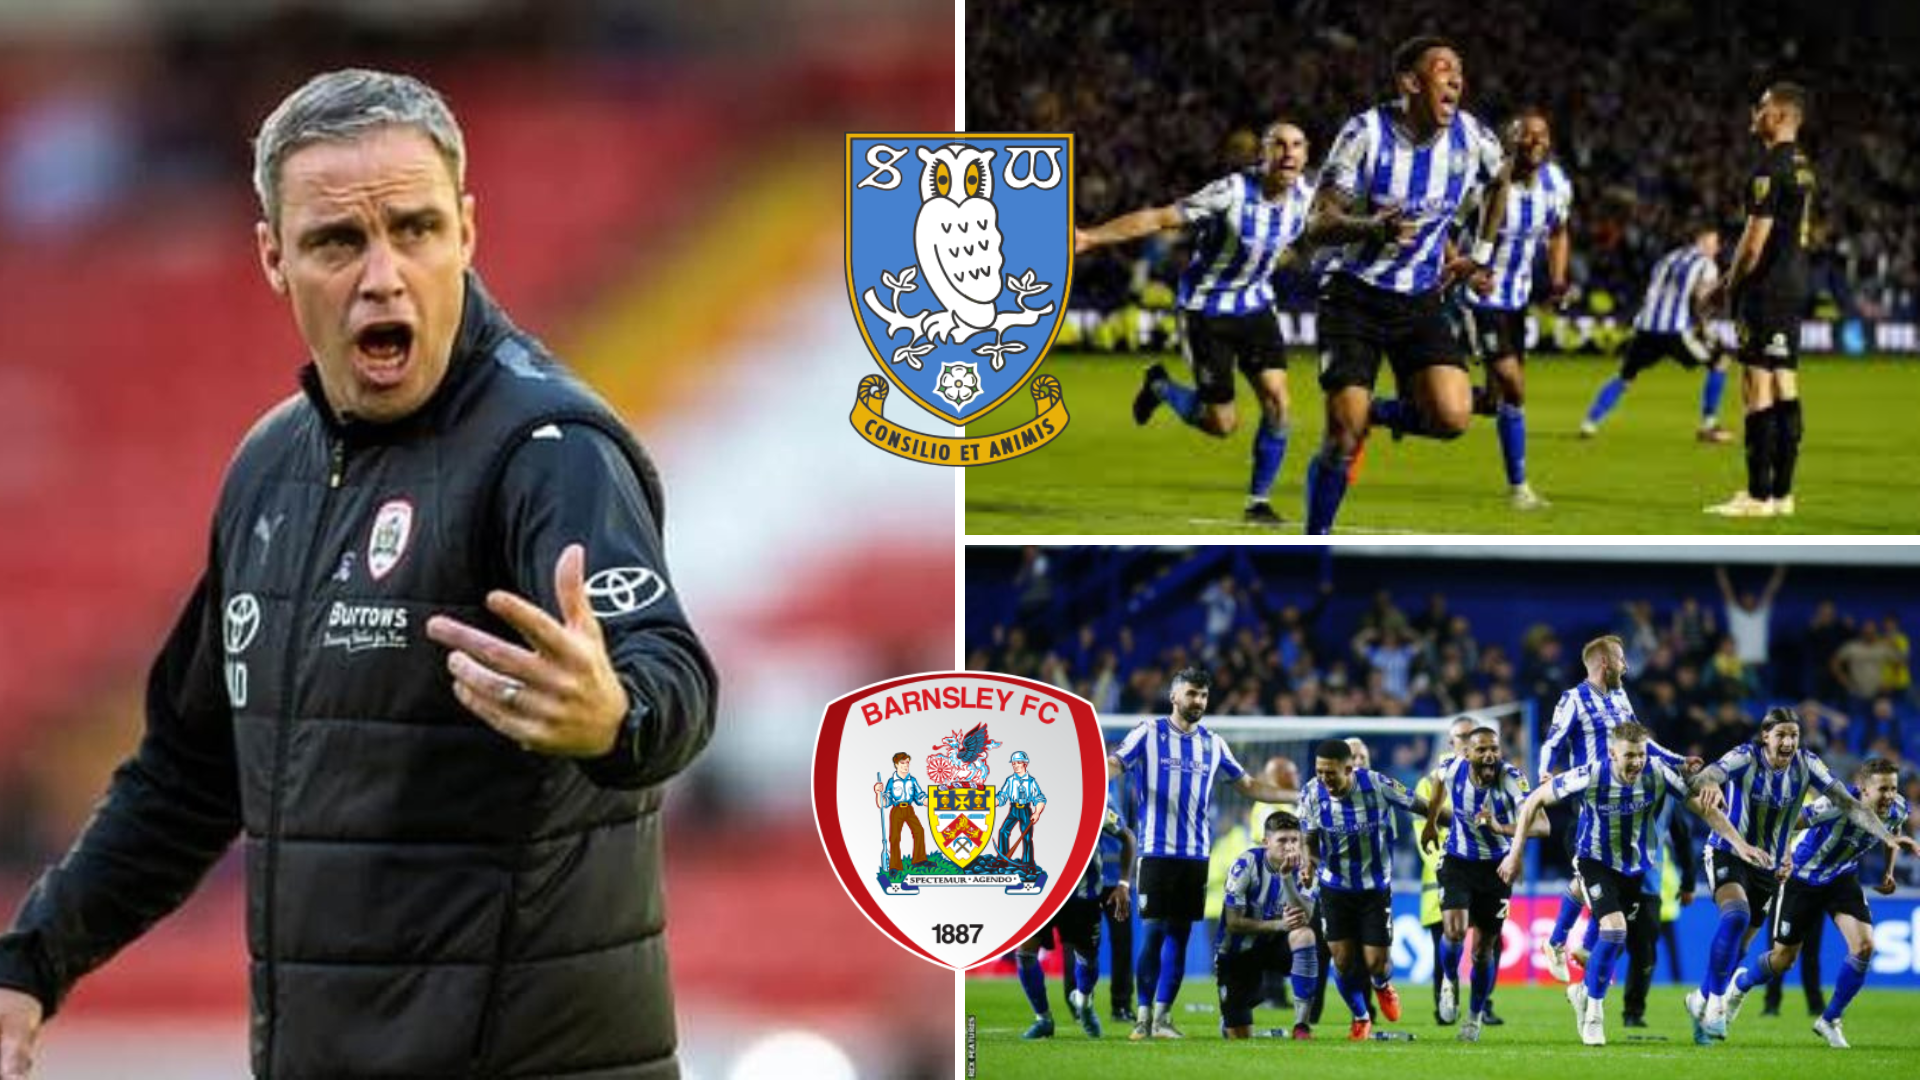 Michael Duff issues verdict on Sheffield Wednesday celebrations ahead of play-off final with Barnsley